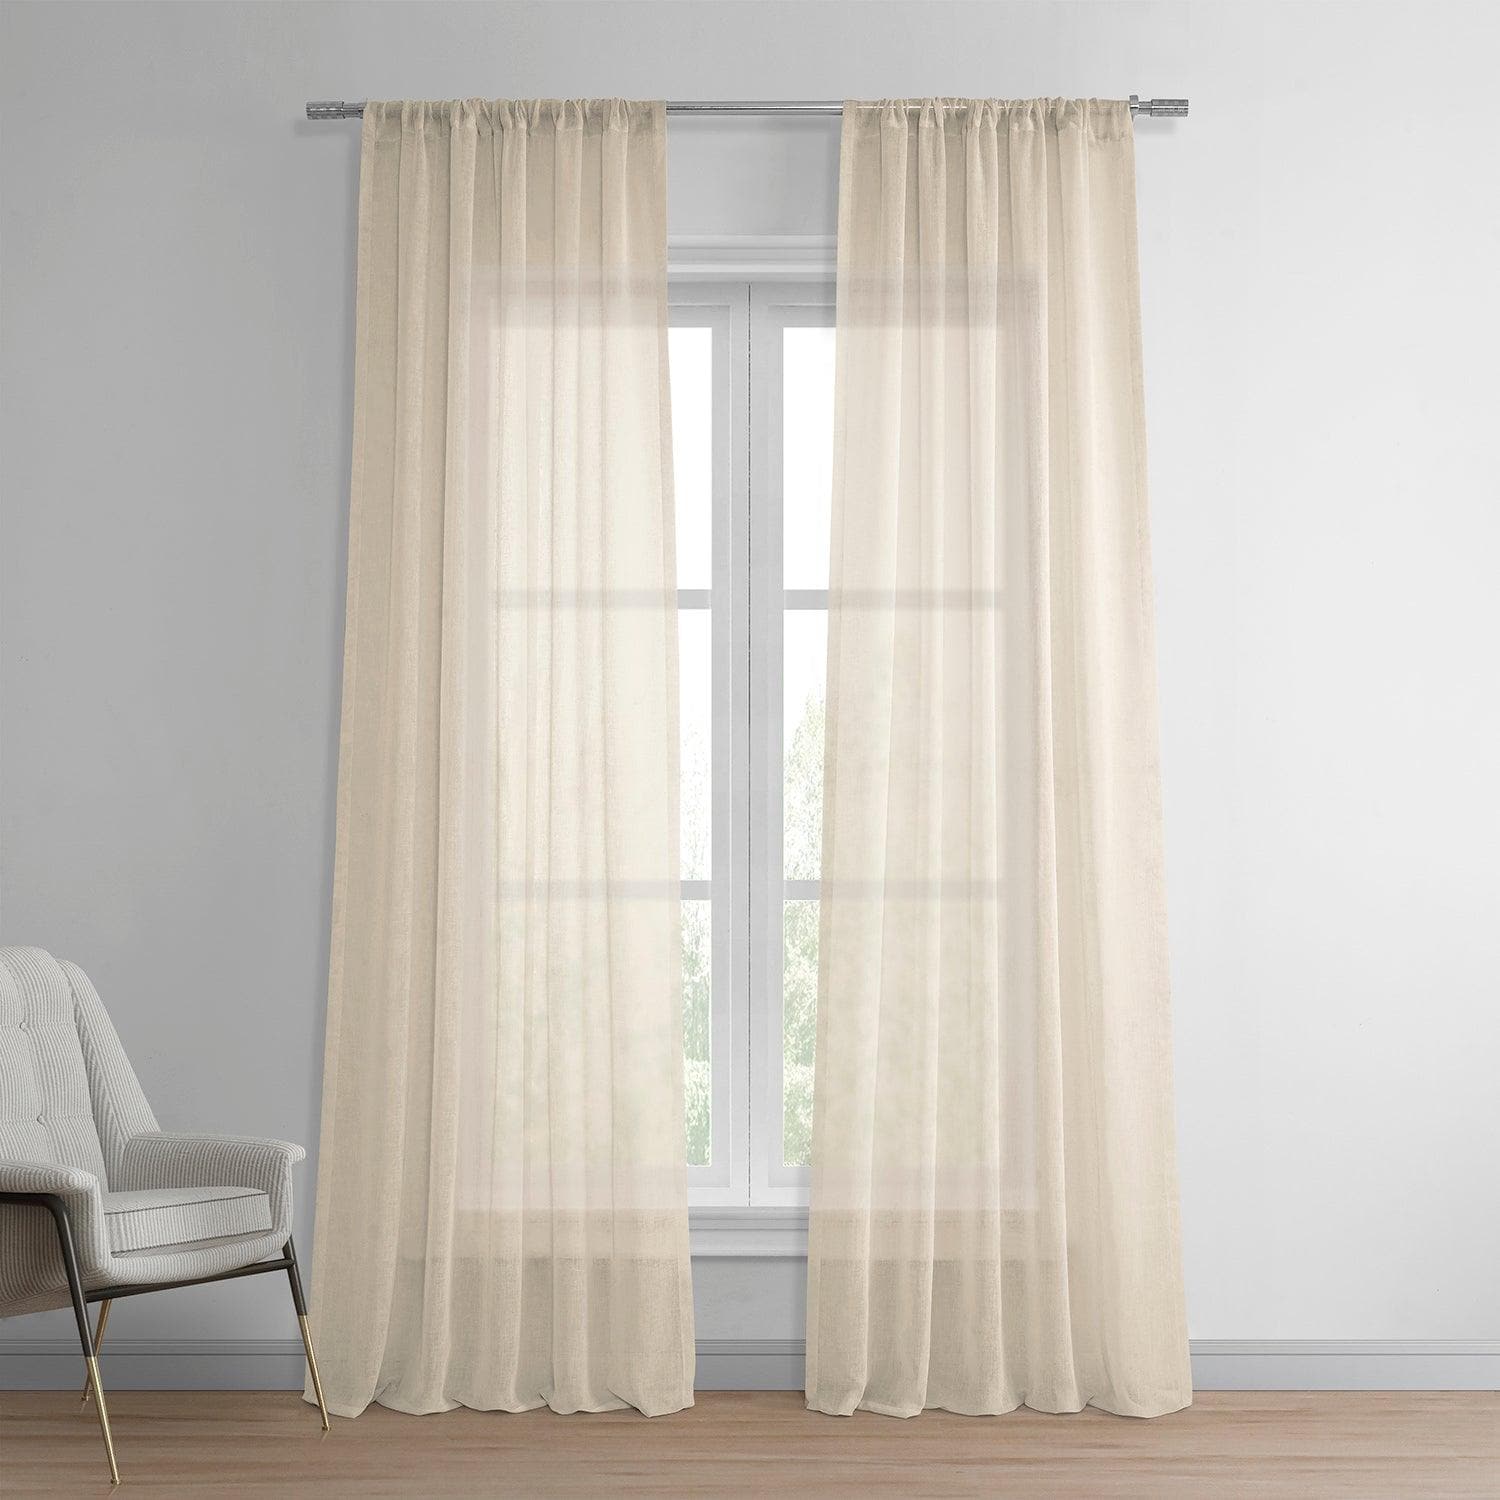 Cotton Seed Textured Faux Linen Sheer Curtain